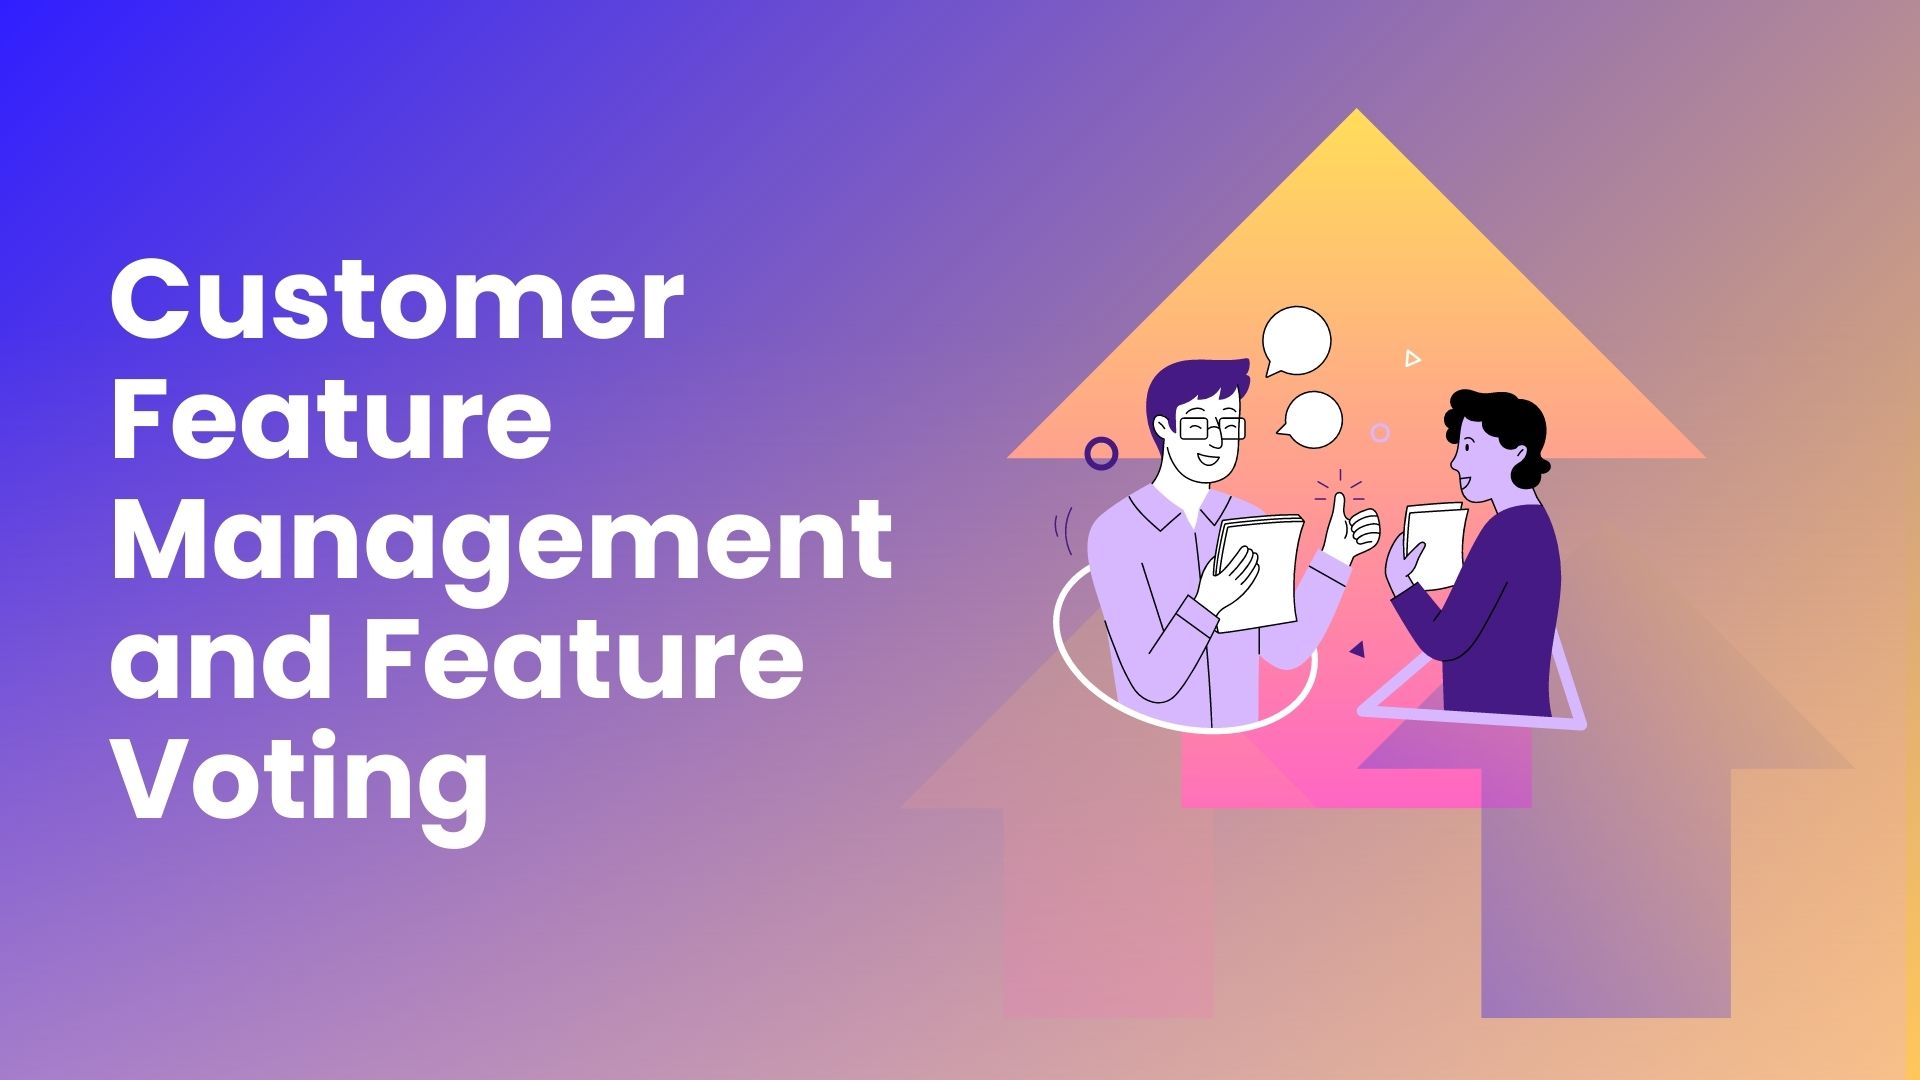 Customer Feature Management and Feature Voting